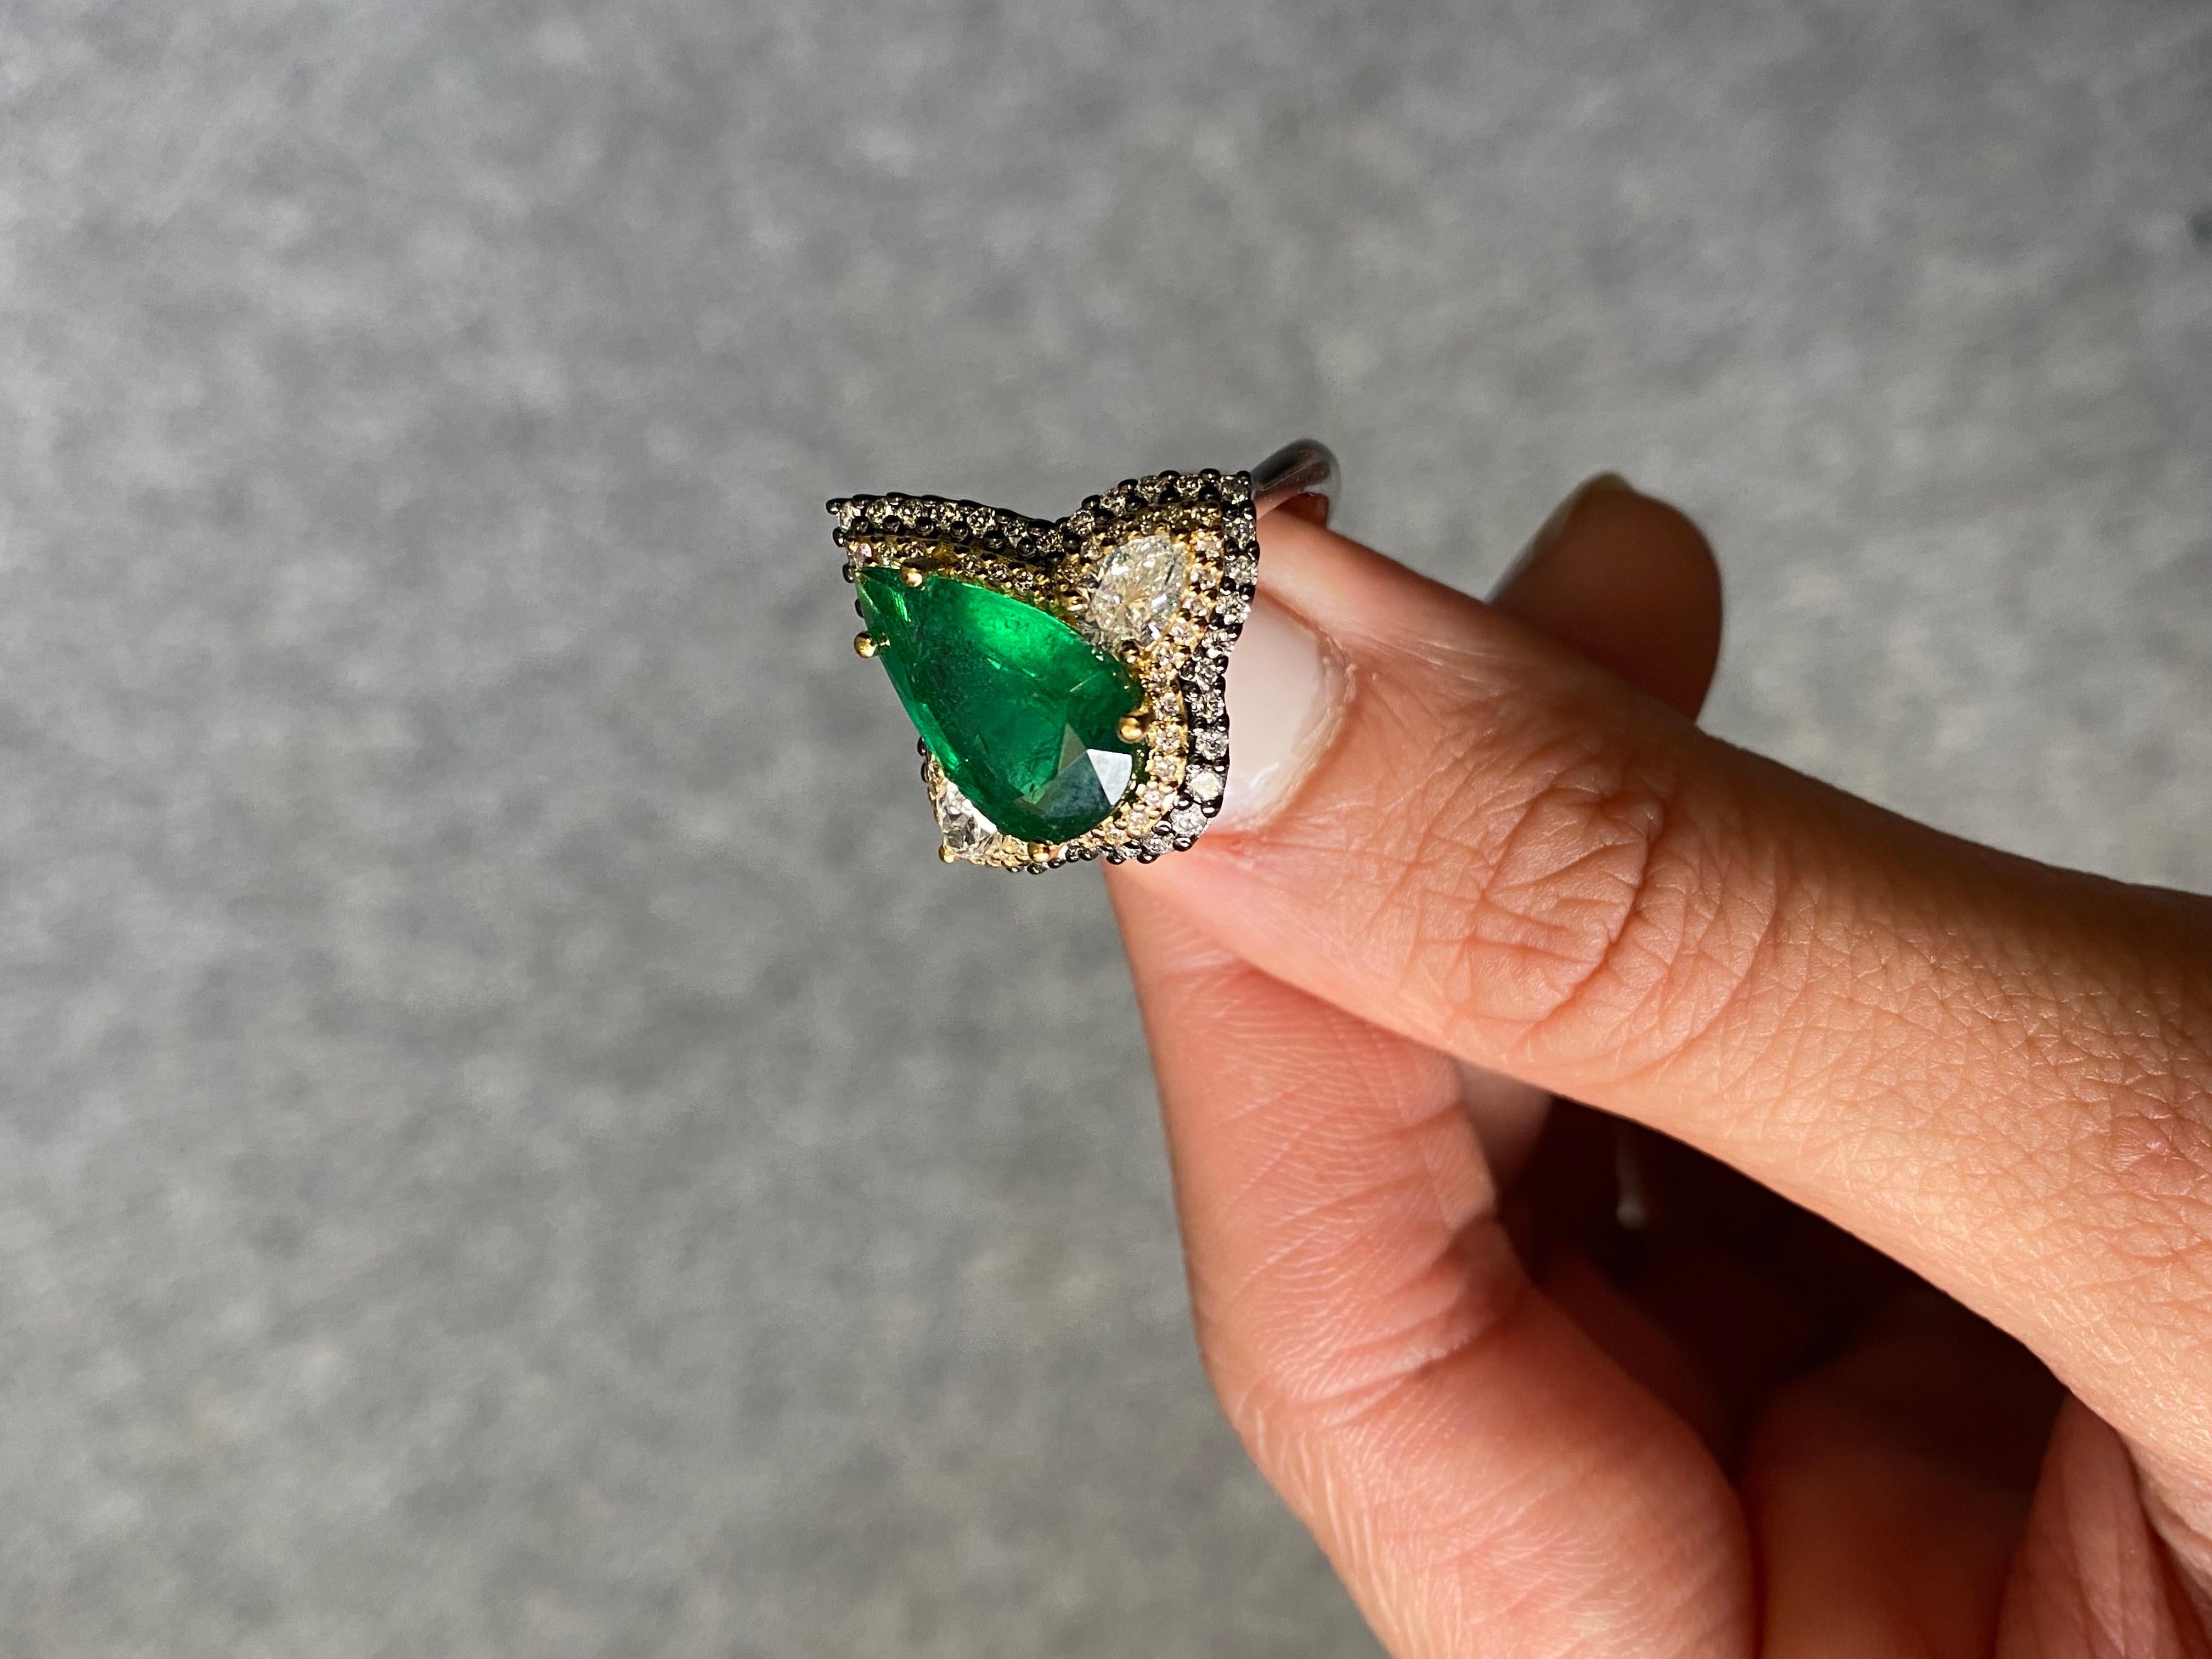 Art Deco Style 3.28 Ctw Fine Quality Zambian Emerald & Diamond Pear Shape French Pave Ring in 18k Two-Tone Gold

Add the influence of the Art Deco Era to your fine jewelry collection with this one-of-a-kind 18k gold ring, reimagined for the modern